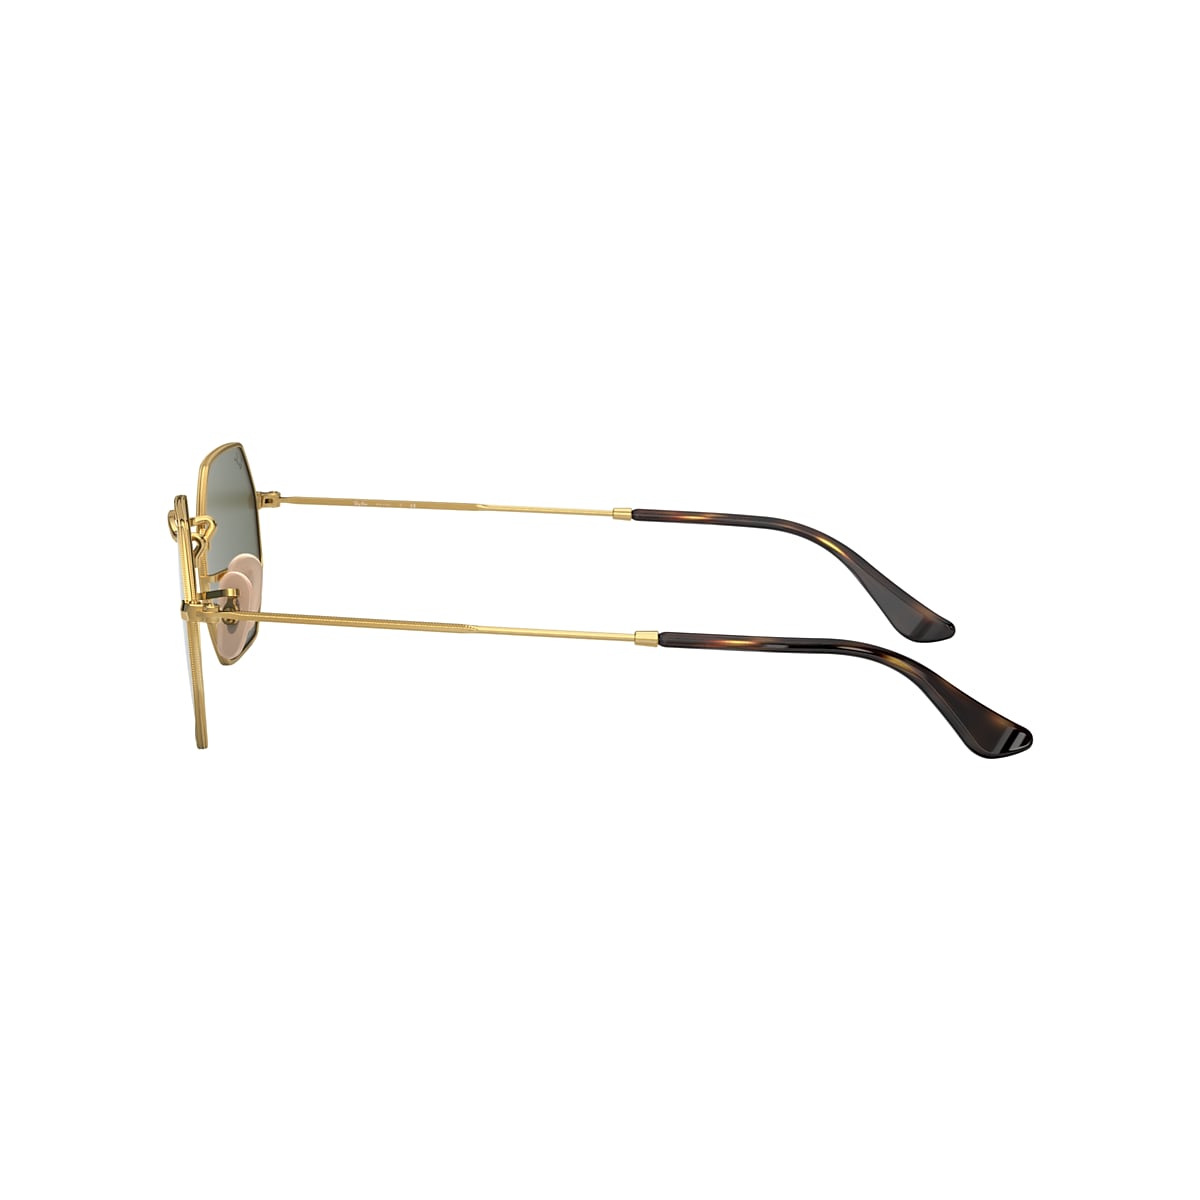 OCTAGONAL CLASSIC Sunglasses in Gold and Green - RB3556N